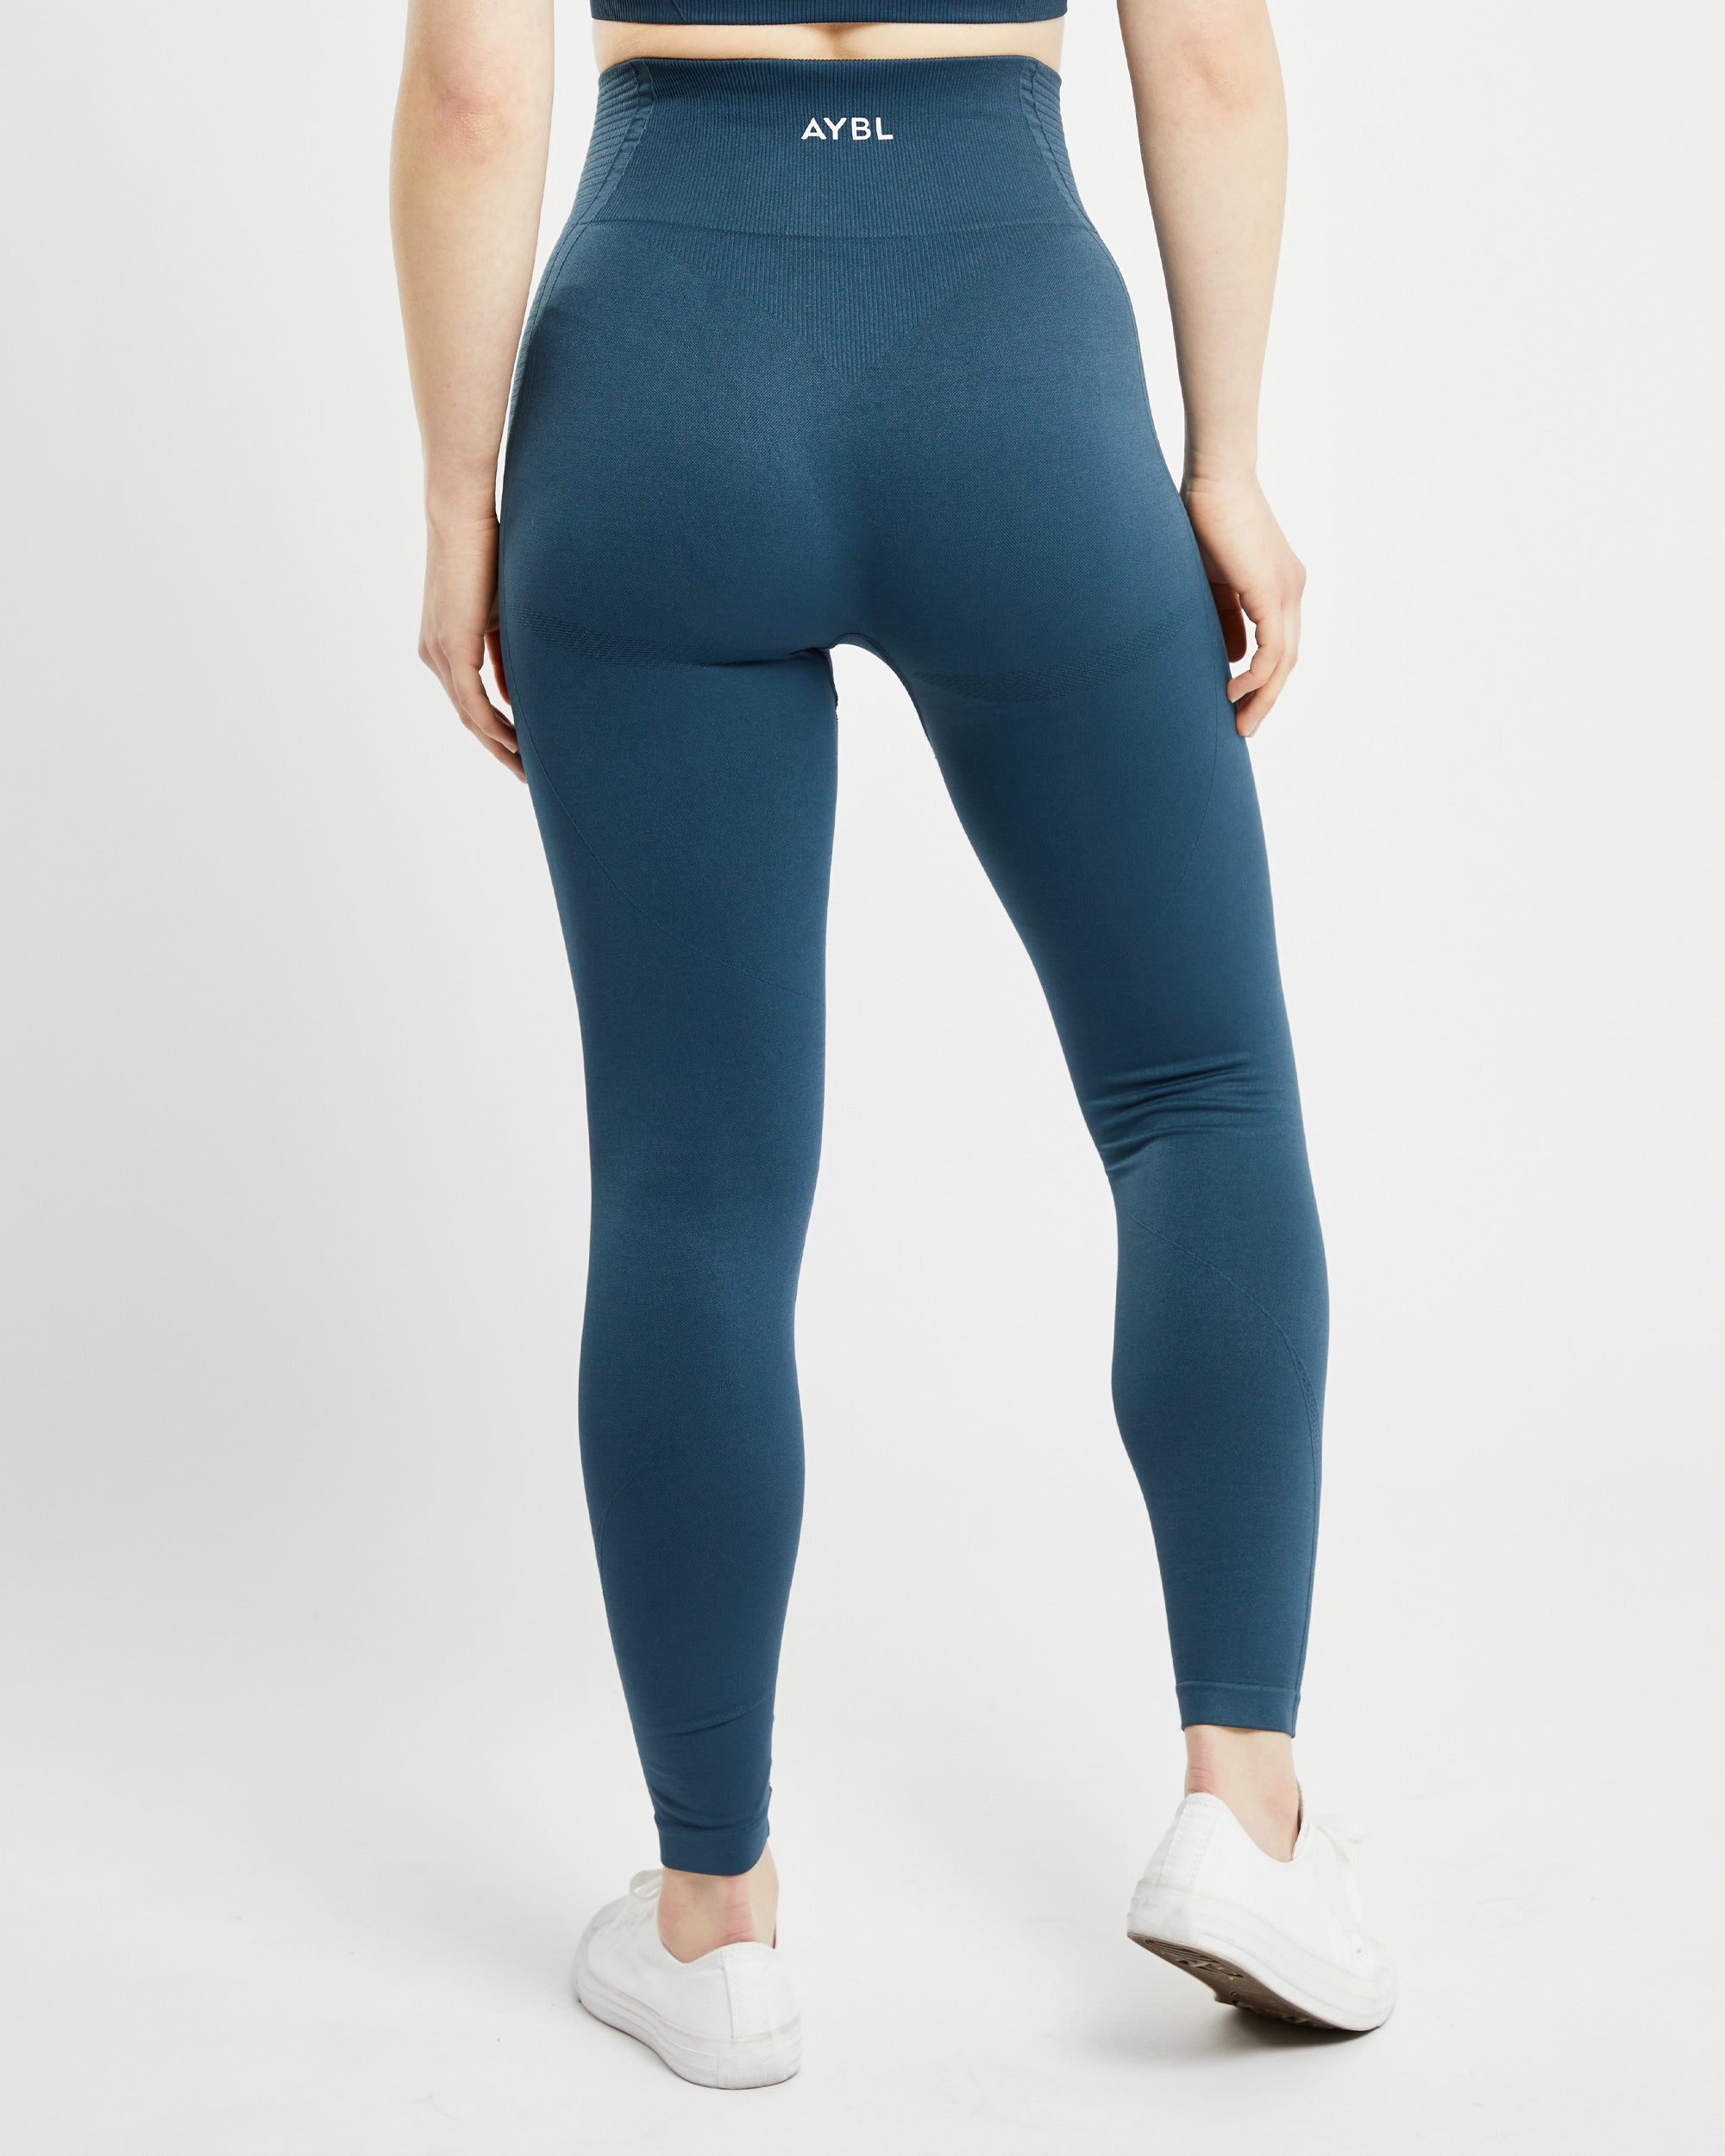 AYBL Seamless Leggings- EVOLVE SPECKLE ♡ Blue Size M - $26 (48% Off Retail)  - From Cinthia